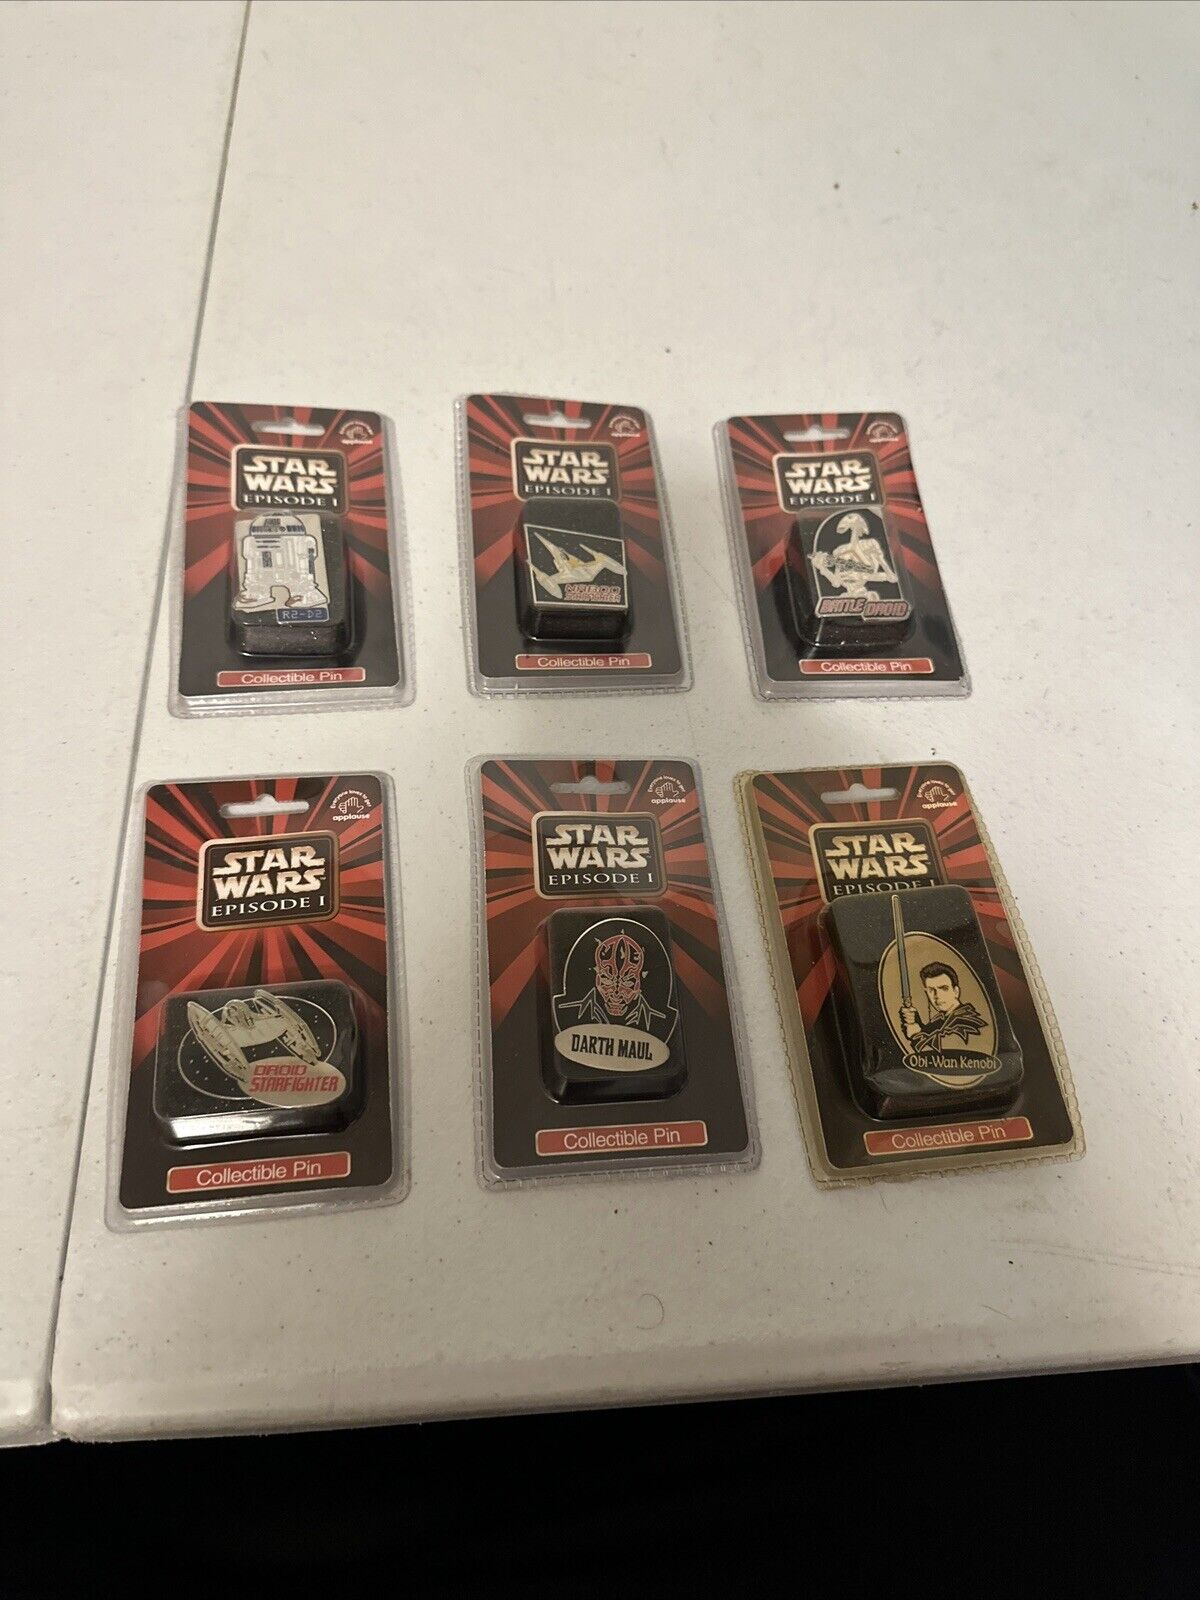 6 Different Star Wars Episode 1 Collectible Pins By Applause Vintage 1999 LOOK